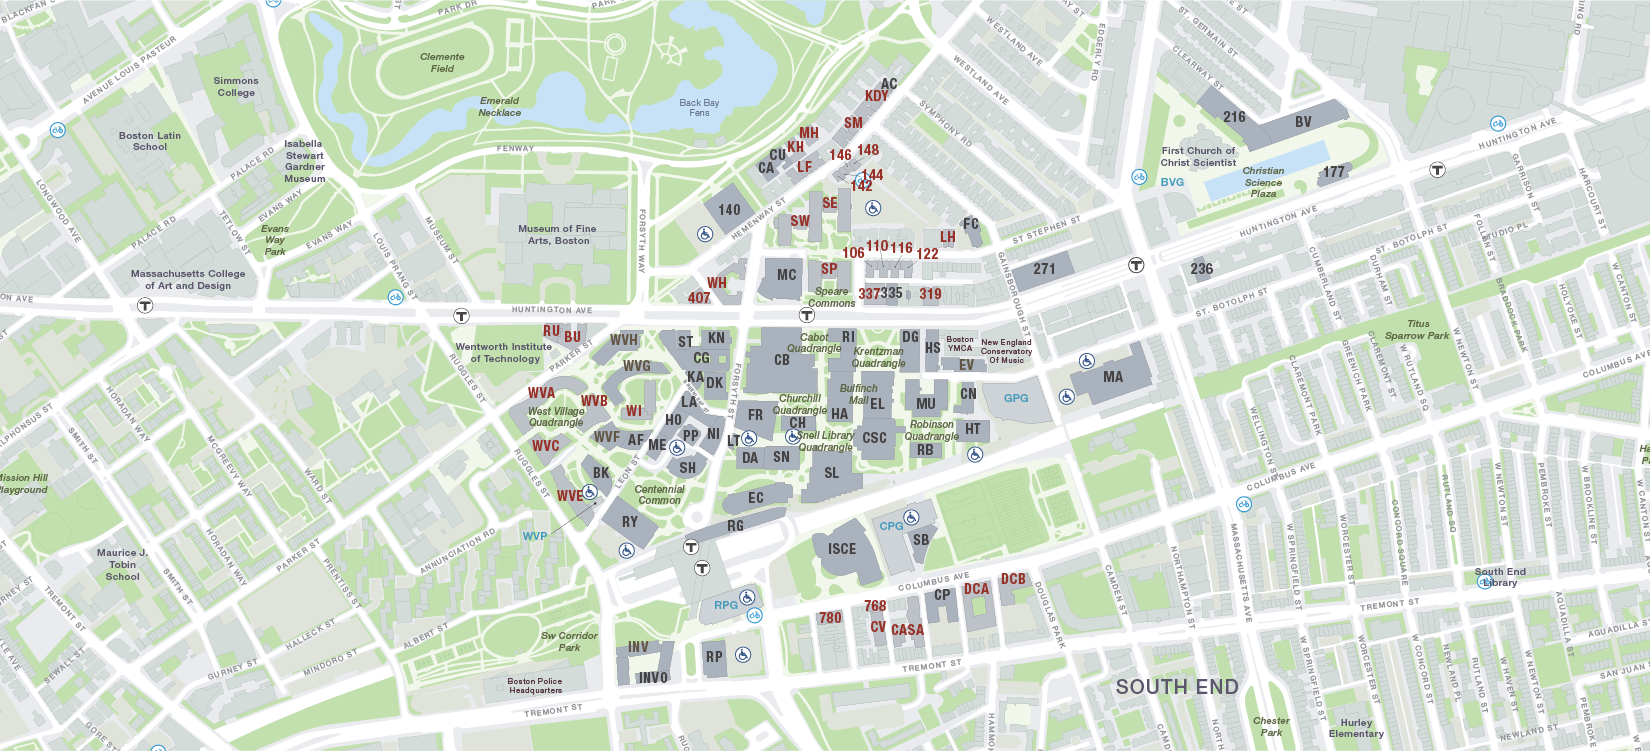 northeastern-university-campus-map-layout-design-print-collateral